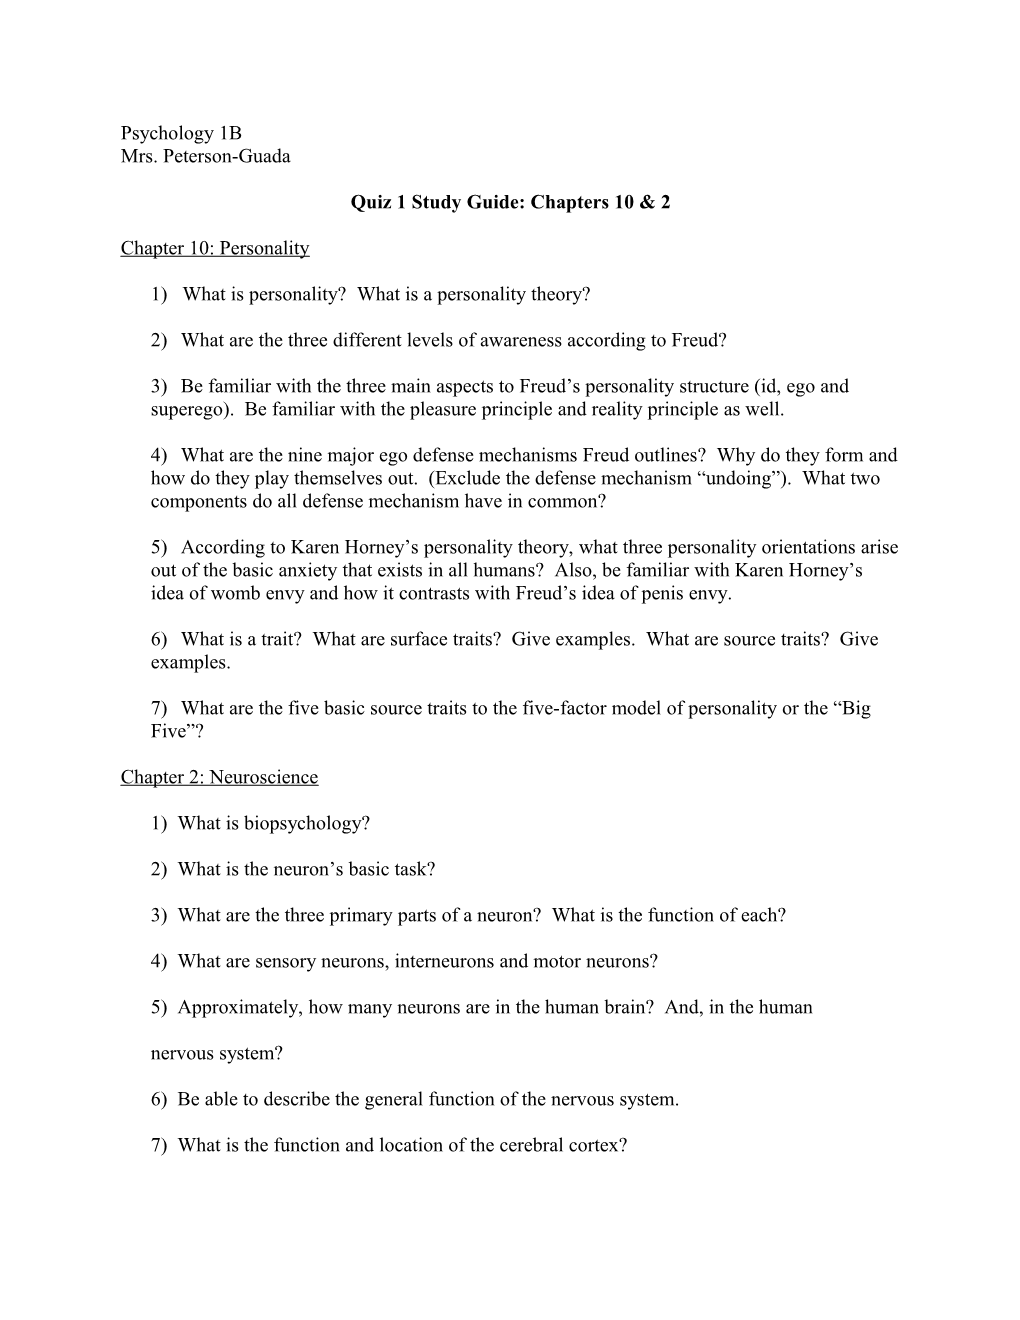 Quiz 1 Study Guide: Chapters 10 & 2